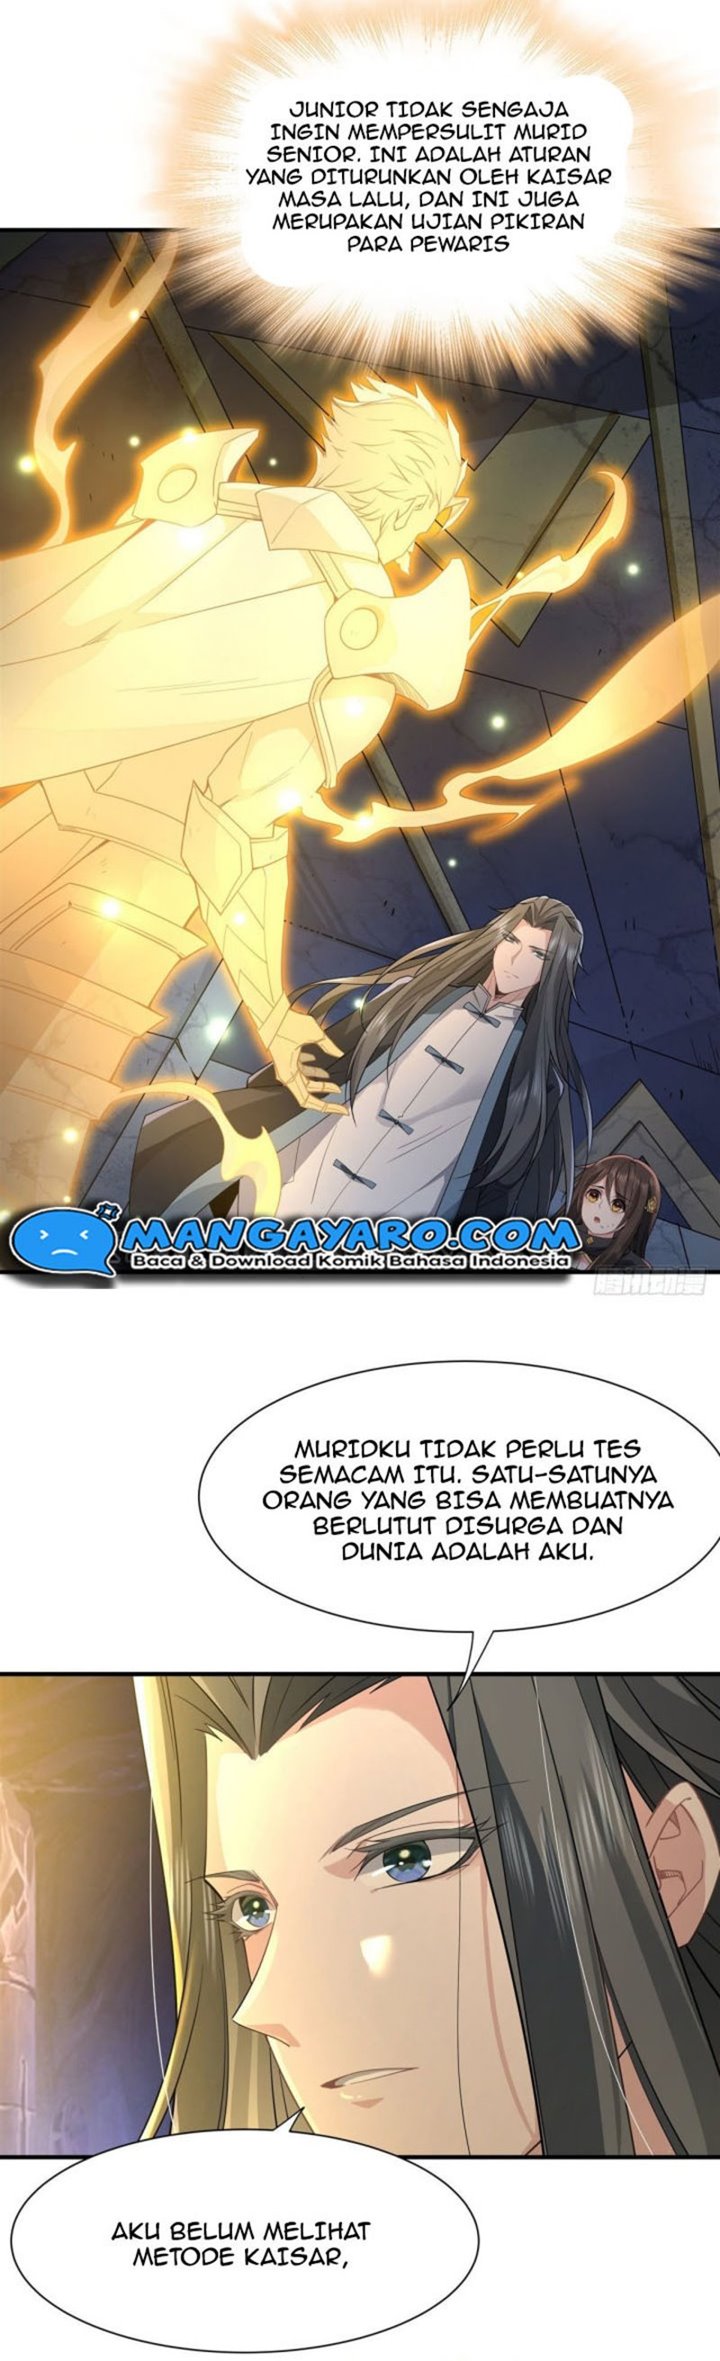 Dilarang COPAS - situs resmi www.mangacanblog.com - Komik my female apprentices are all big shots from the future 013 - chapter 13 14 Indonesia my female apprentices are all big shots from the future 013 - chapter 13 Terbaru 12|Baca Manga Komik Indonesia|Mangacan